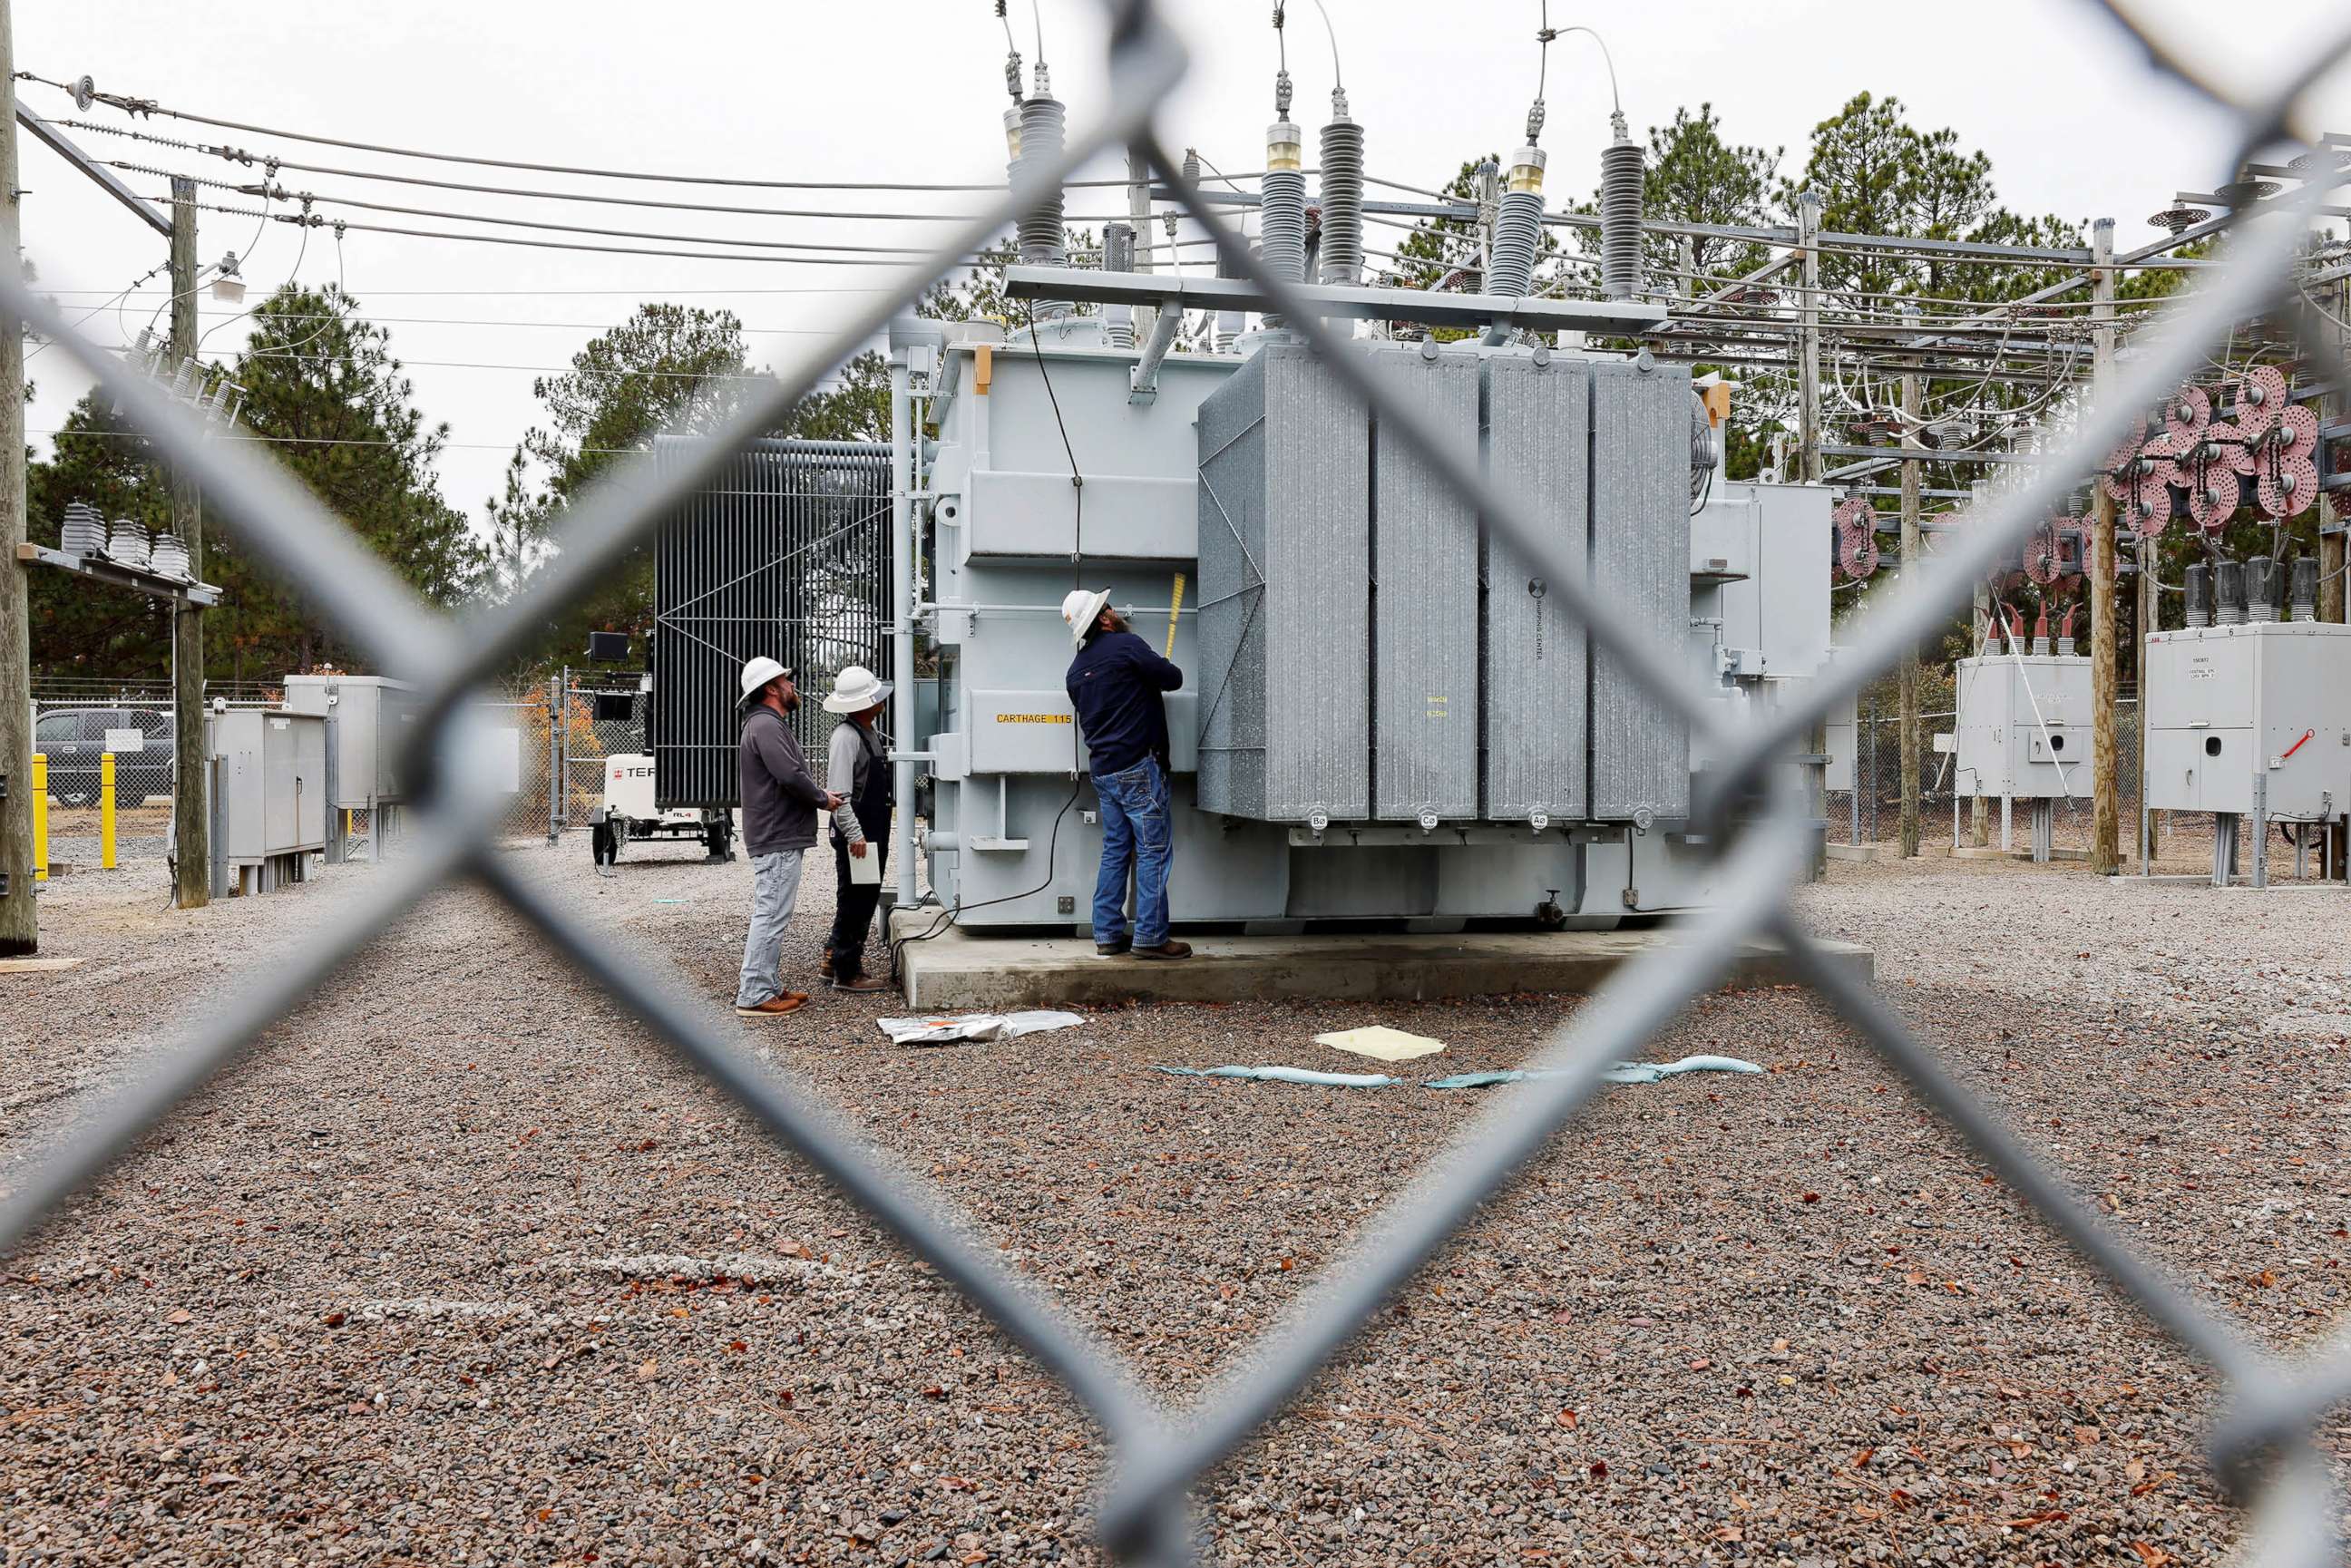 PHOTO: Duke Energy workers inspect a transformer radiator that they said was damaged by gunfire that crippled an electrical substation after the Moore County Sheriff said that vandalism caused a mass power outage, in Carthage, N.C.